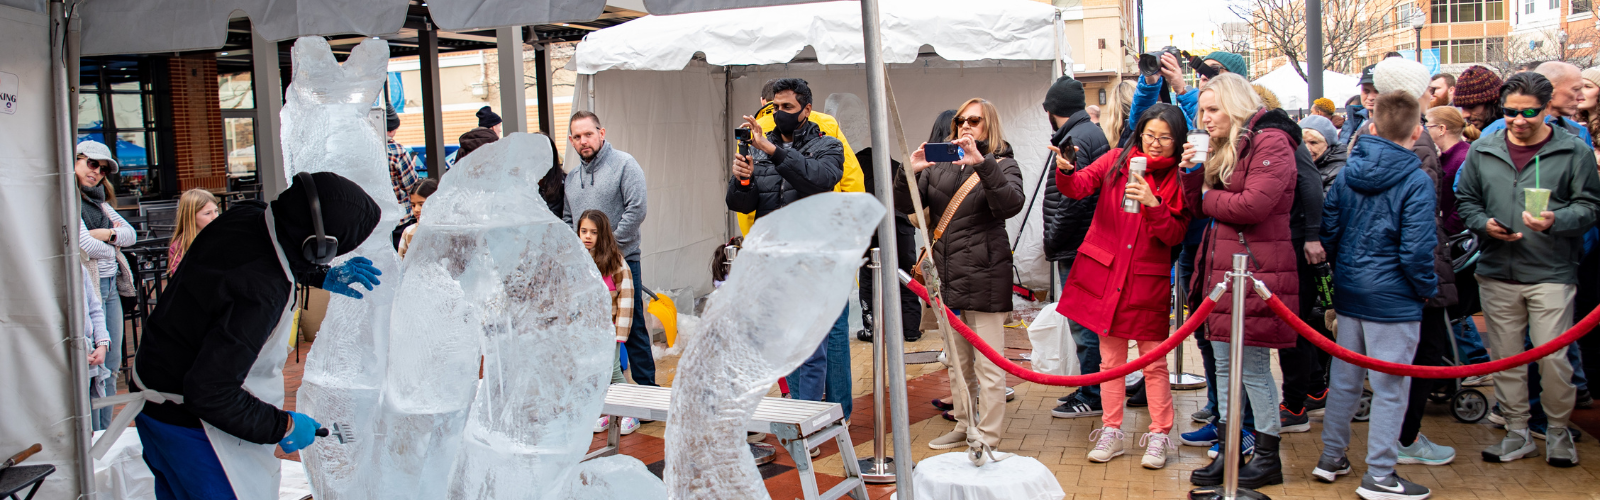 One-Of-A-Kind Ice Sculptures Return to Village at Leesburg This Weekend